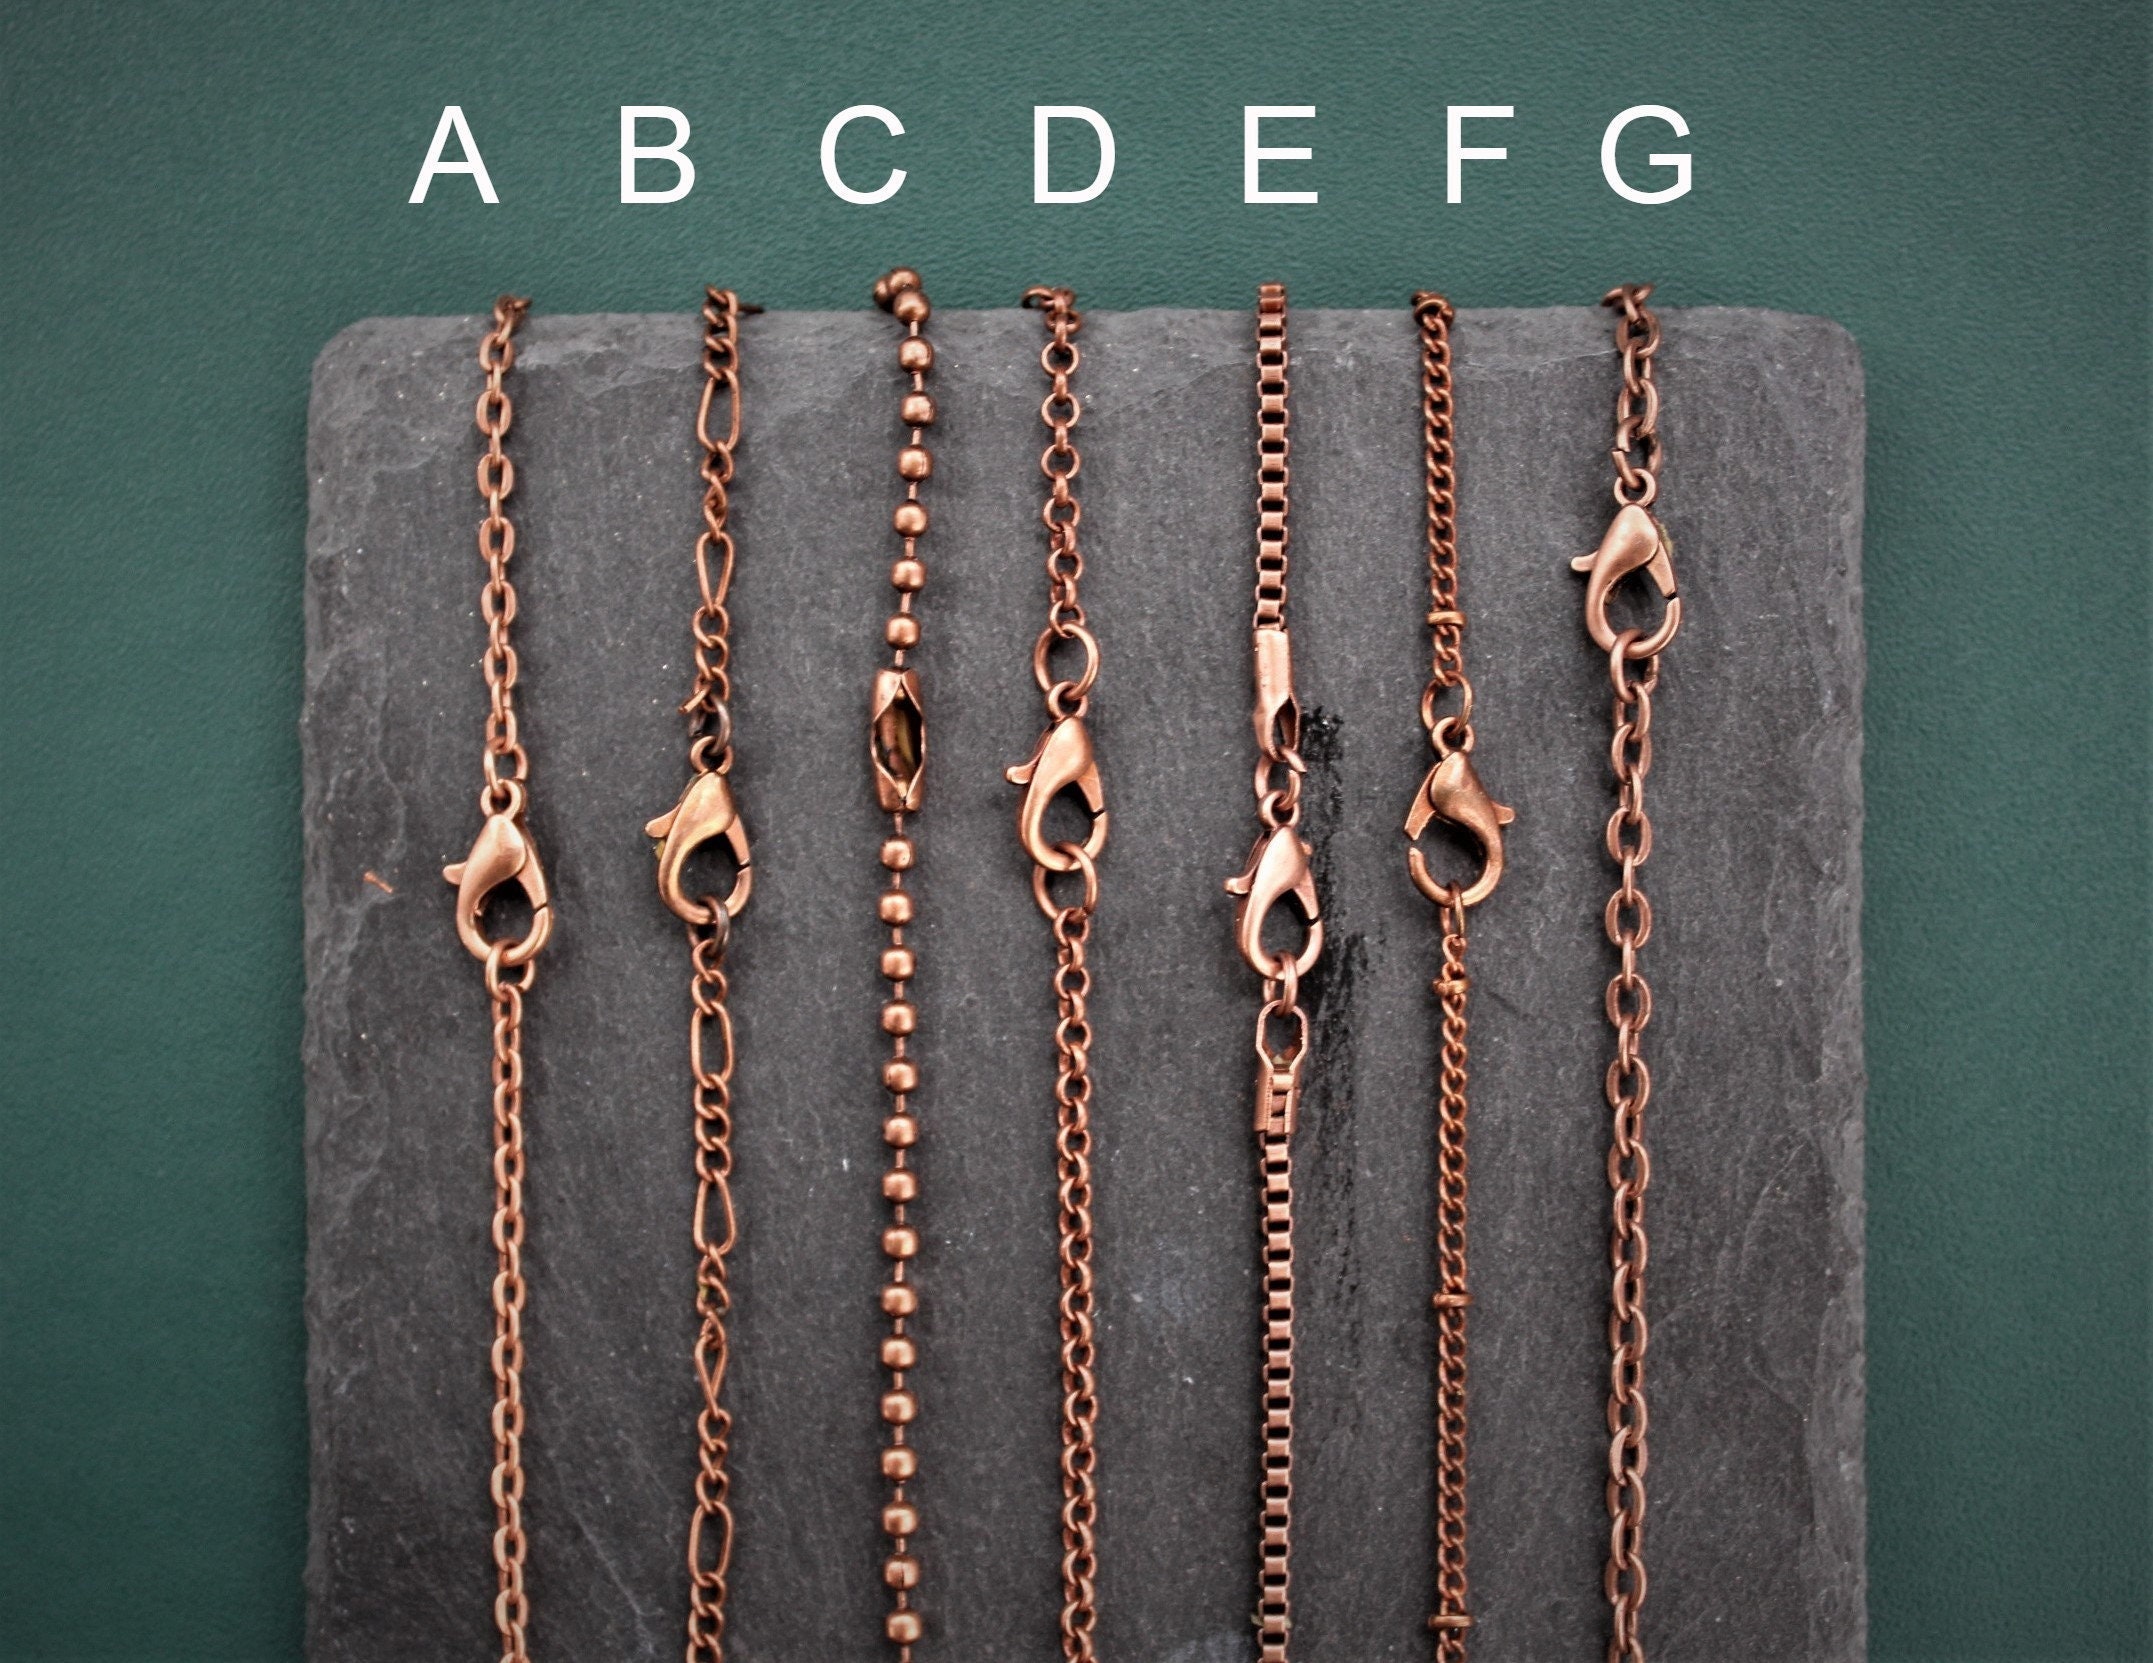 Extra Copper Chain Necklace Finished Antiqued Oxidized Ball Bead Satellite  Rolo Cable Flat Electroformed Jewelry Replacement Dark Metal 